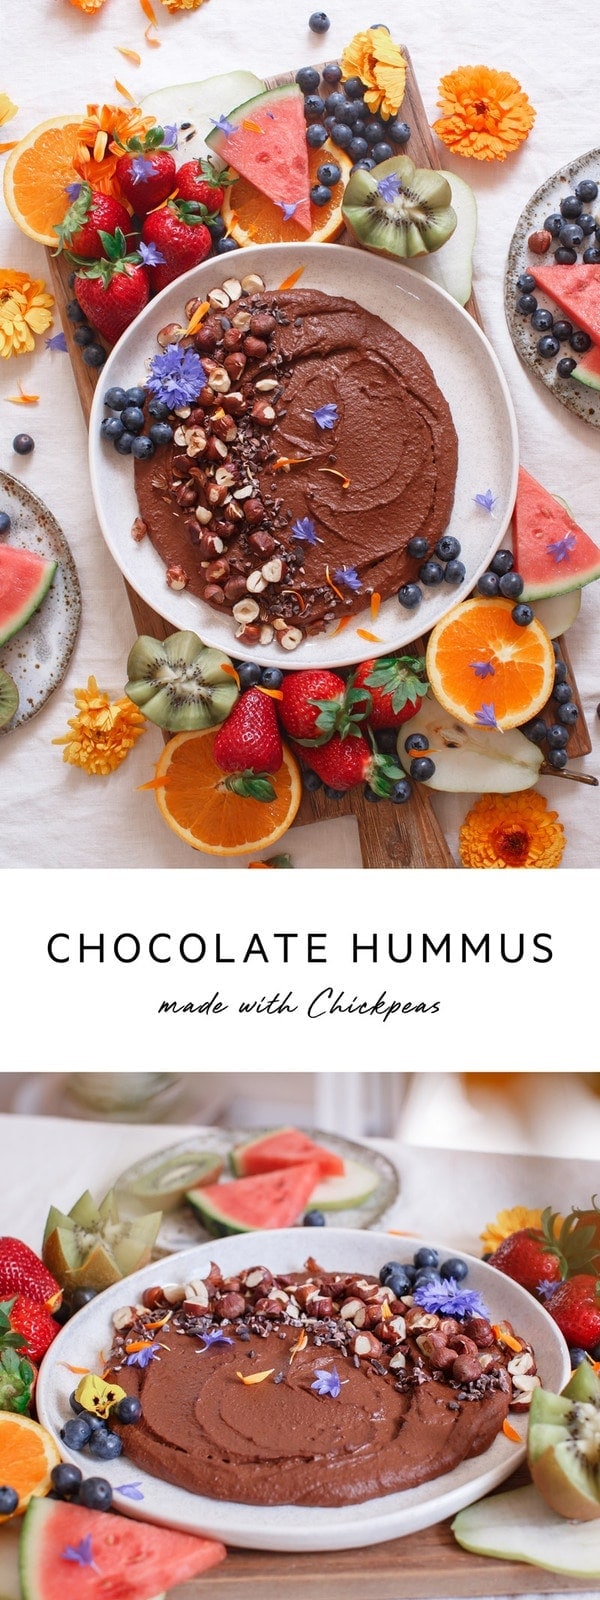 Chocolate Hummus – who would have thought?! 6 simple ingredients, 5 minutes to make, protein and fibre rich. Fluffy and rich, perfect with fresh summer fruits. #chocolatespread #chocolatehummus #veganspread #dessertideas #healthychocolateideas #healthydesserts #kidsrecipesideas #kidsdesserts #partyideas #kidsparty #kidscooking #AscensionKitchen